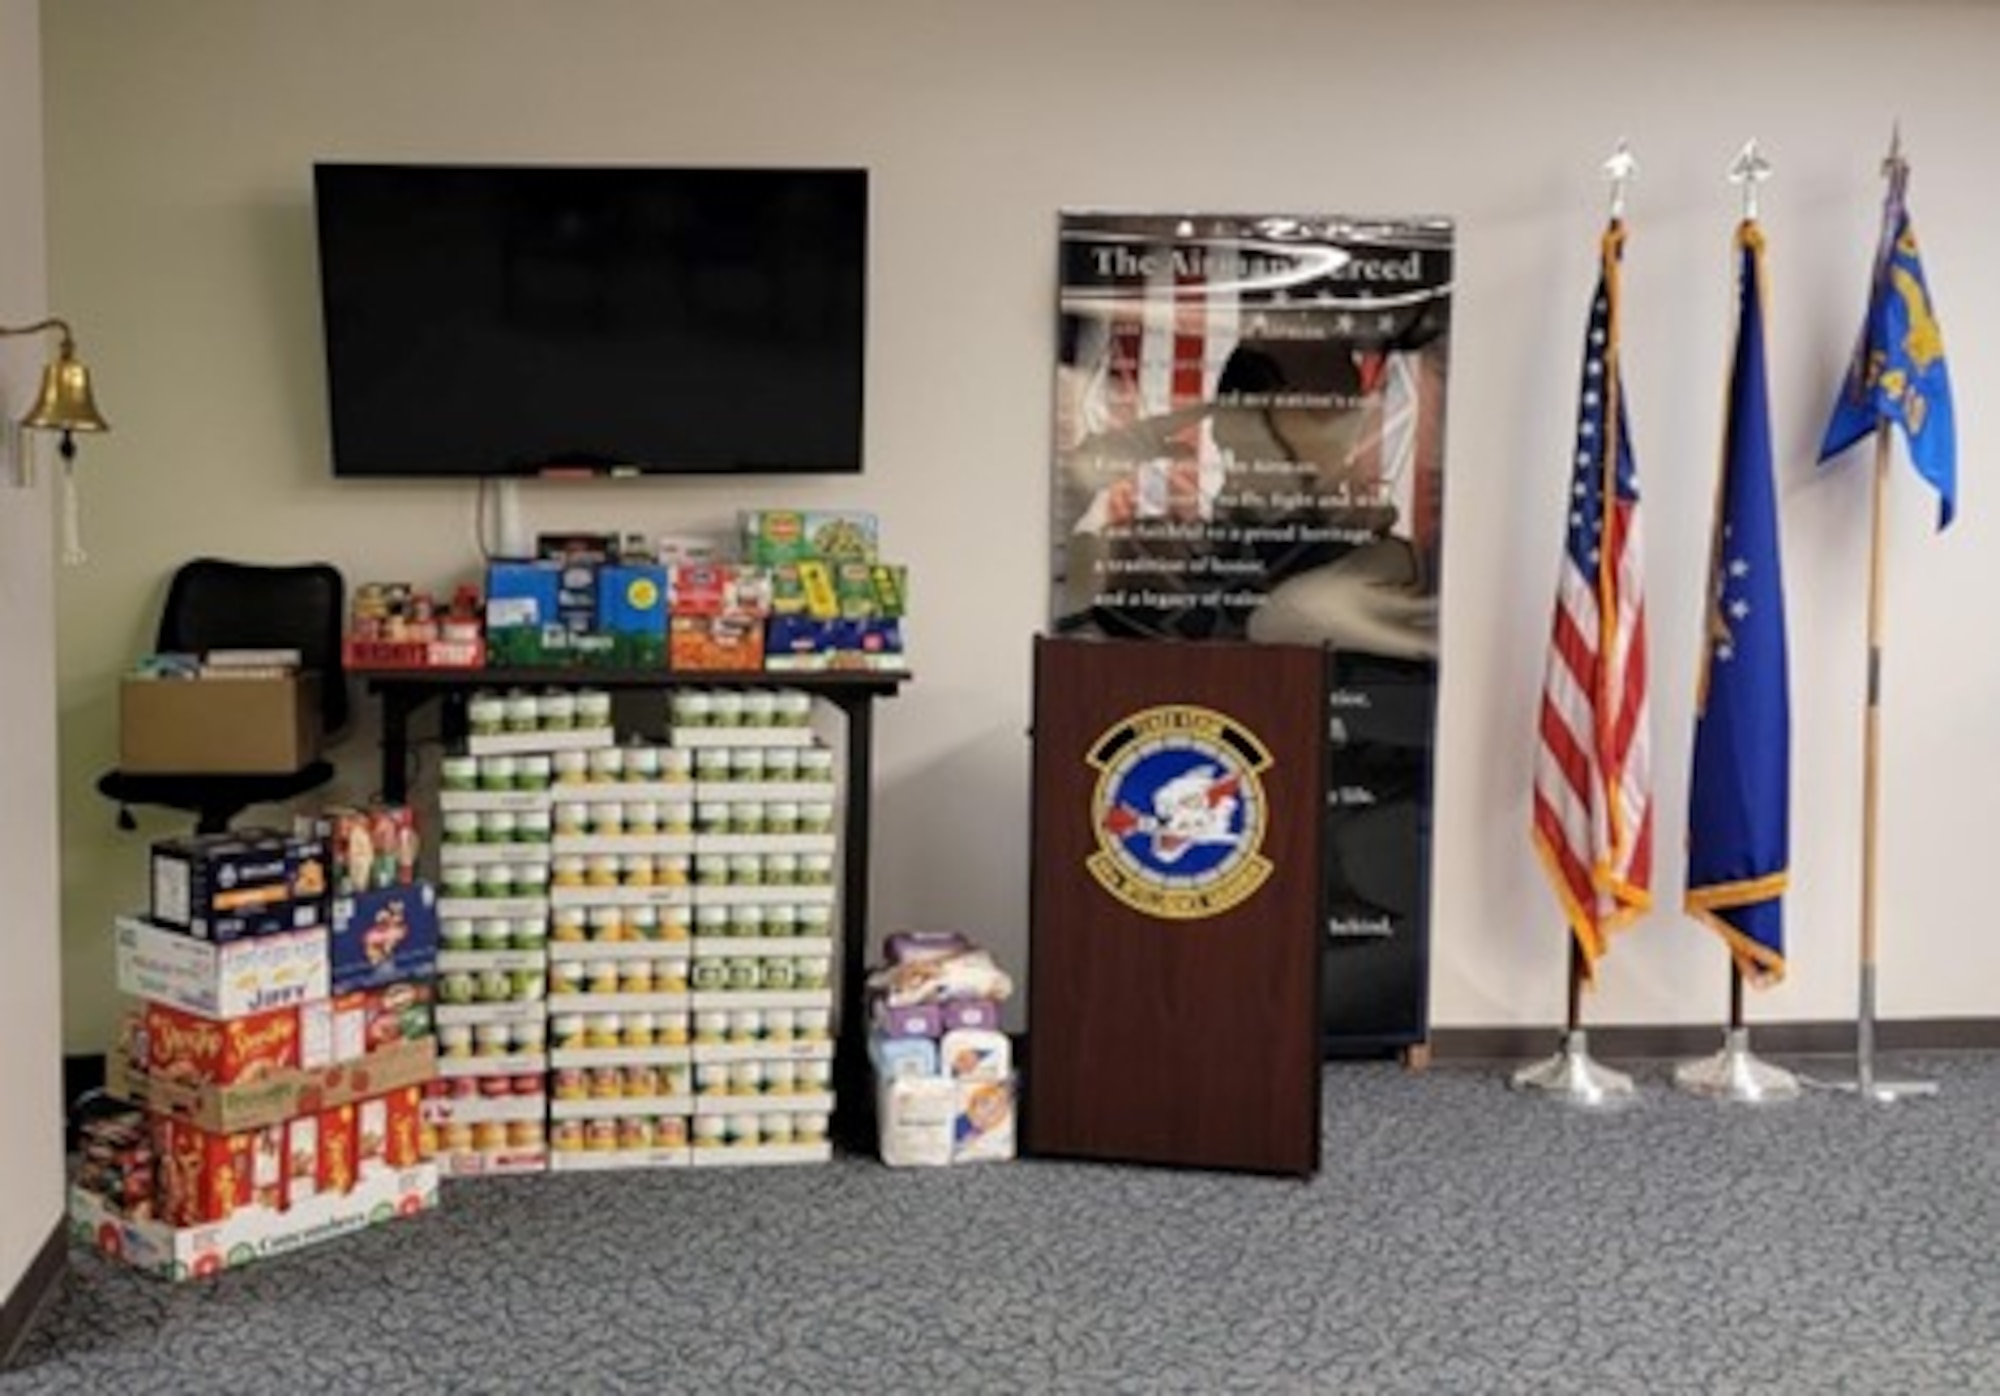 For the third year in a row, members of the 64th Intelligence Squadron (IS) conducted a two-month-long food drive that culminated in 760 pounds of food (pictured) being delivered to Dayton-based Hearth Community Place Food Pantry at the end of November. The squadron conducts community impact activities such as this throughout the year to support local families. (Courtesy Photo)